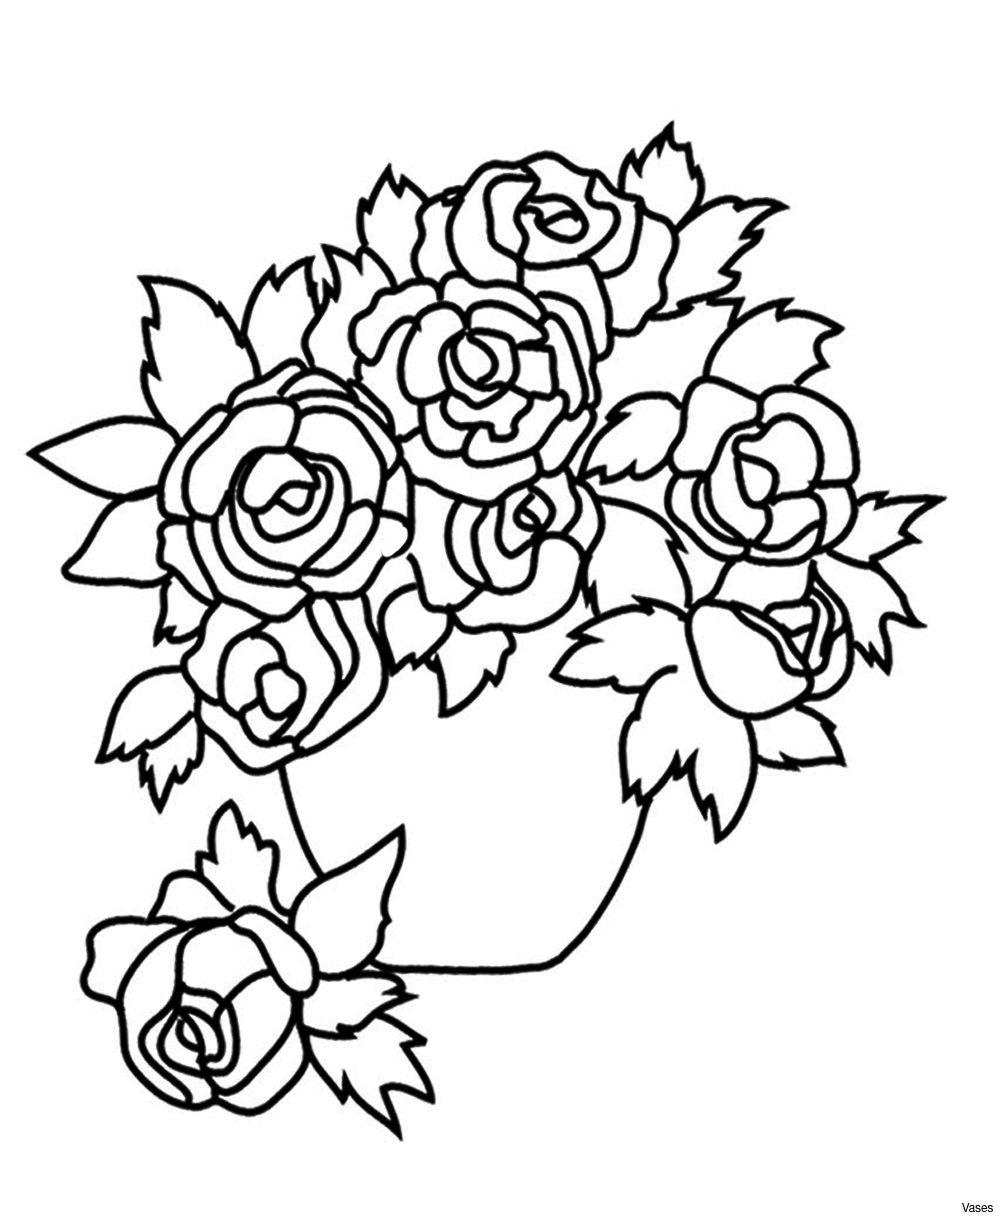 13 attractive Little Flower Vases 2024 free download little flower vases of cool vases flower vase coloring page pages flowers in a top i 0d with regard to cool coloring pages cool vases flower vase coloring page pages flowers in a top i